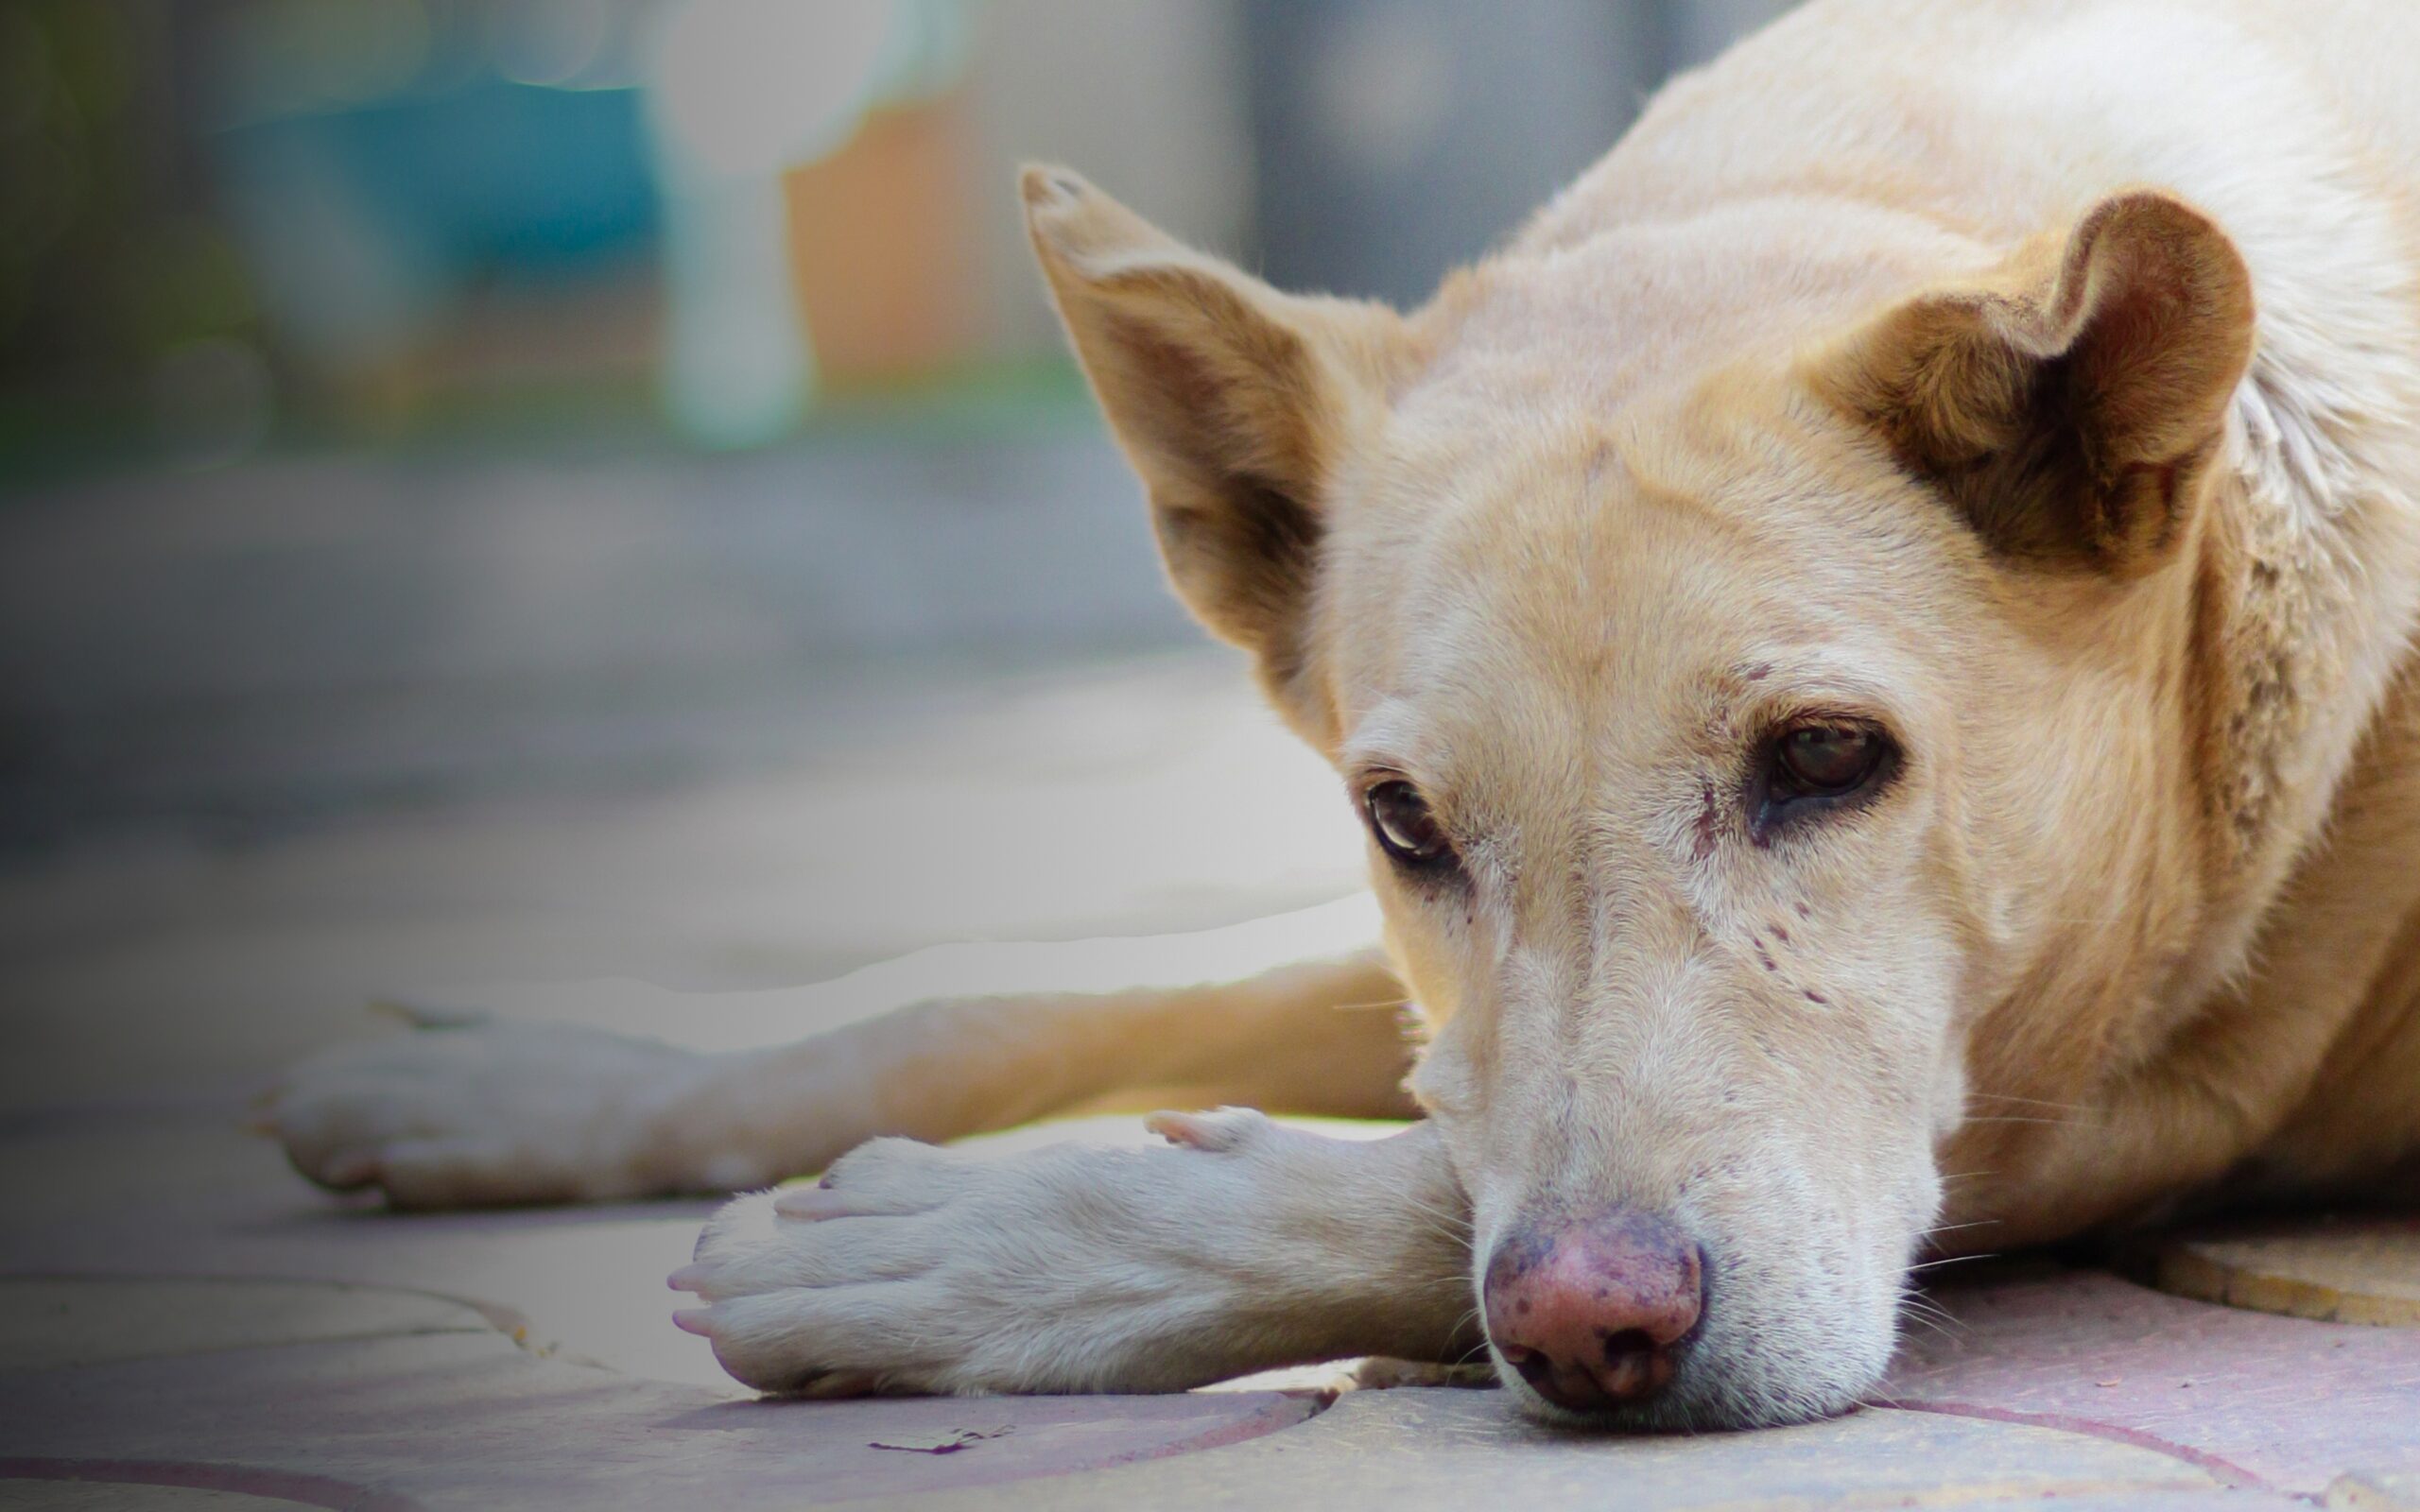 End suffering ofStray dogs with